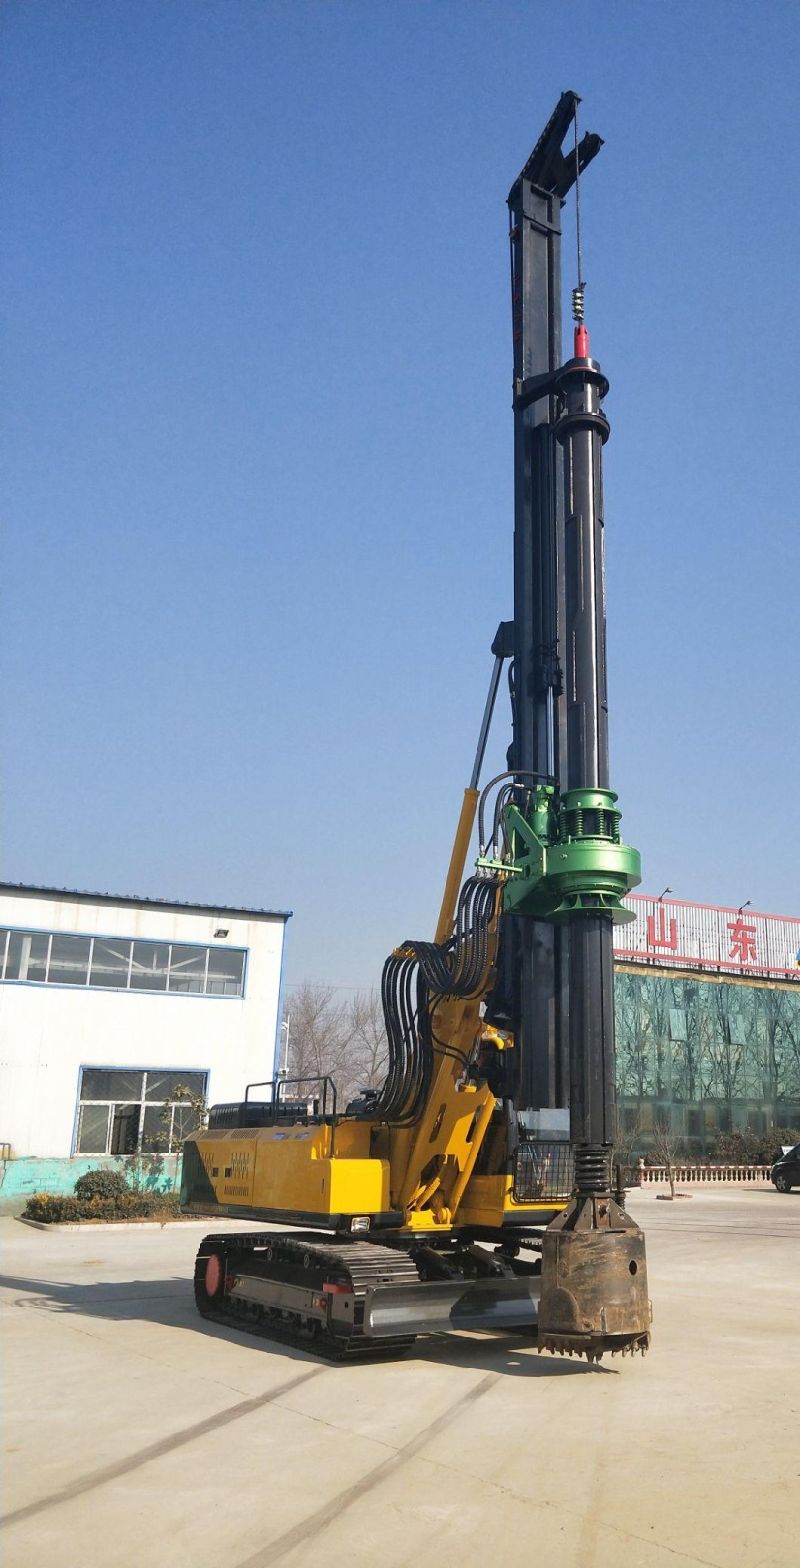 25m Hydraulic Economic Drilling Machine Middle Size Exportion Drilling Machine for Sale